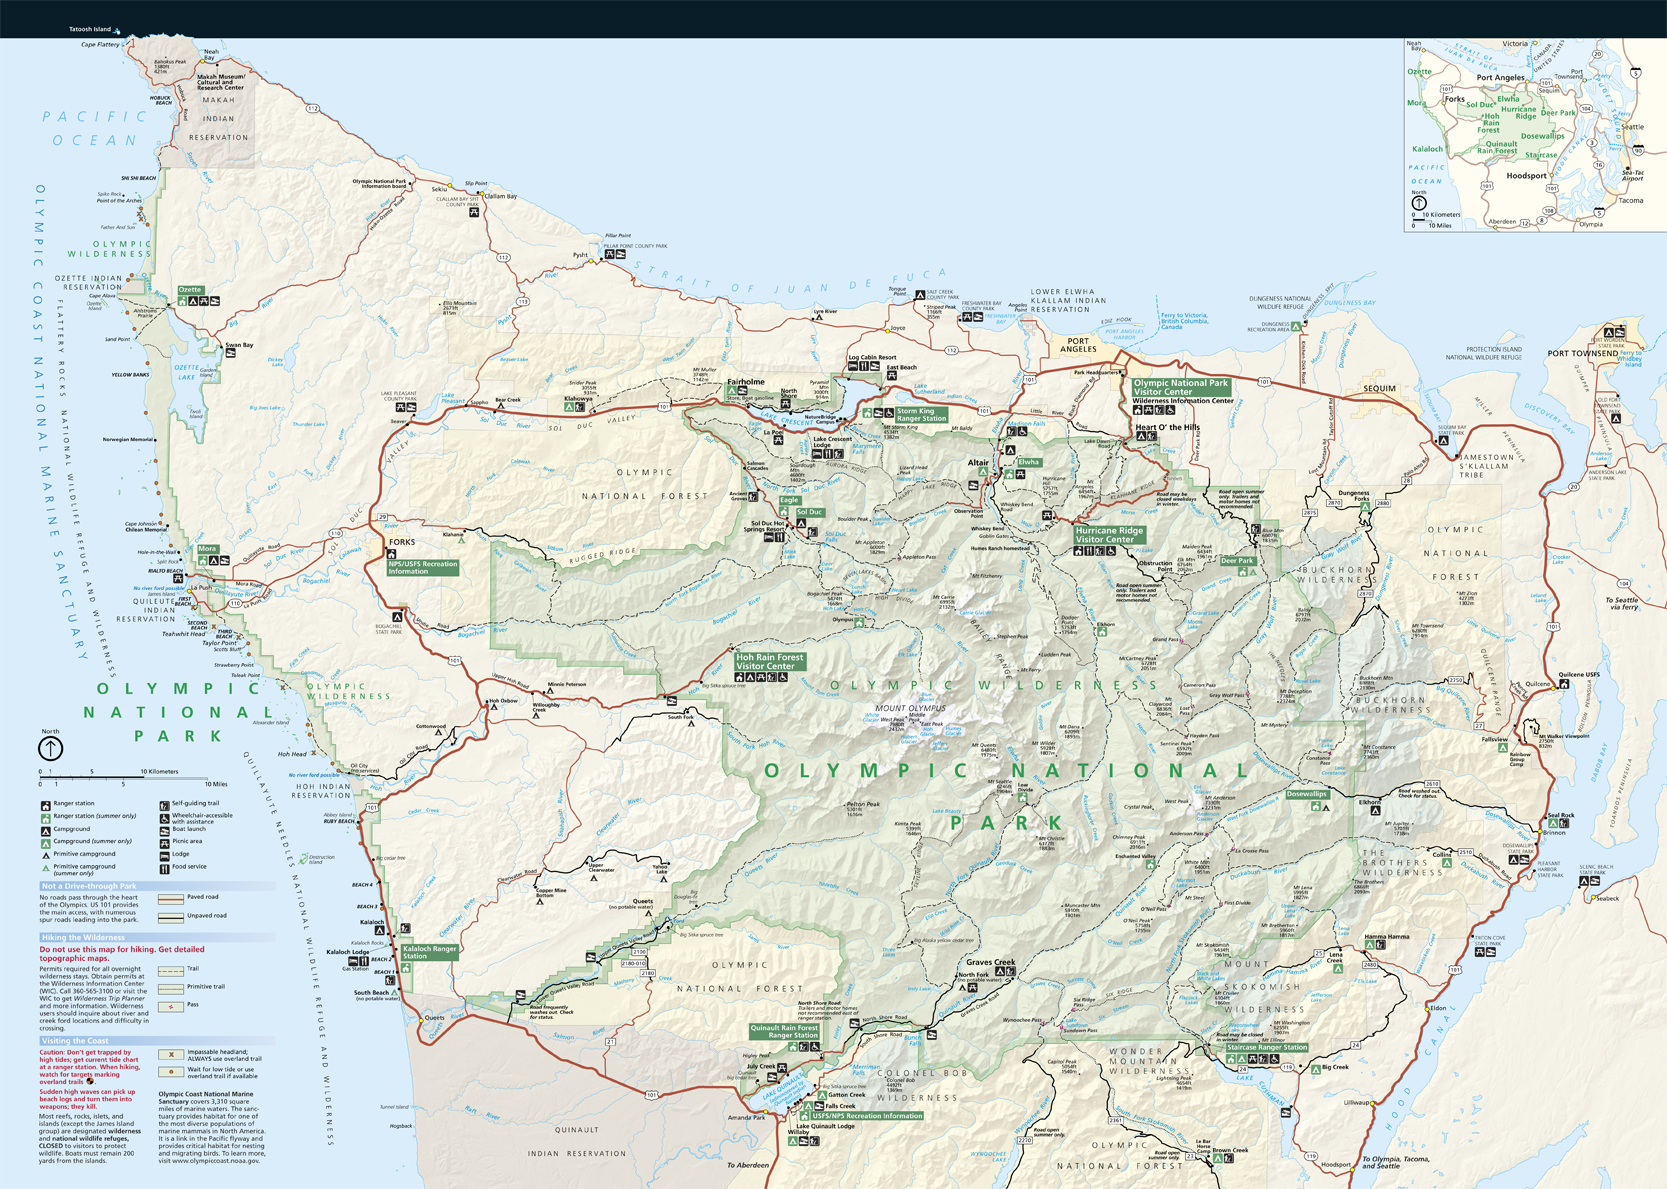 Map_of_Olympic_National_Park.jpg